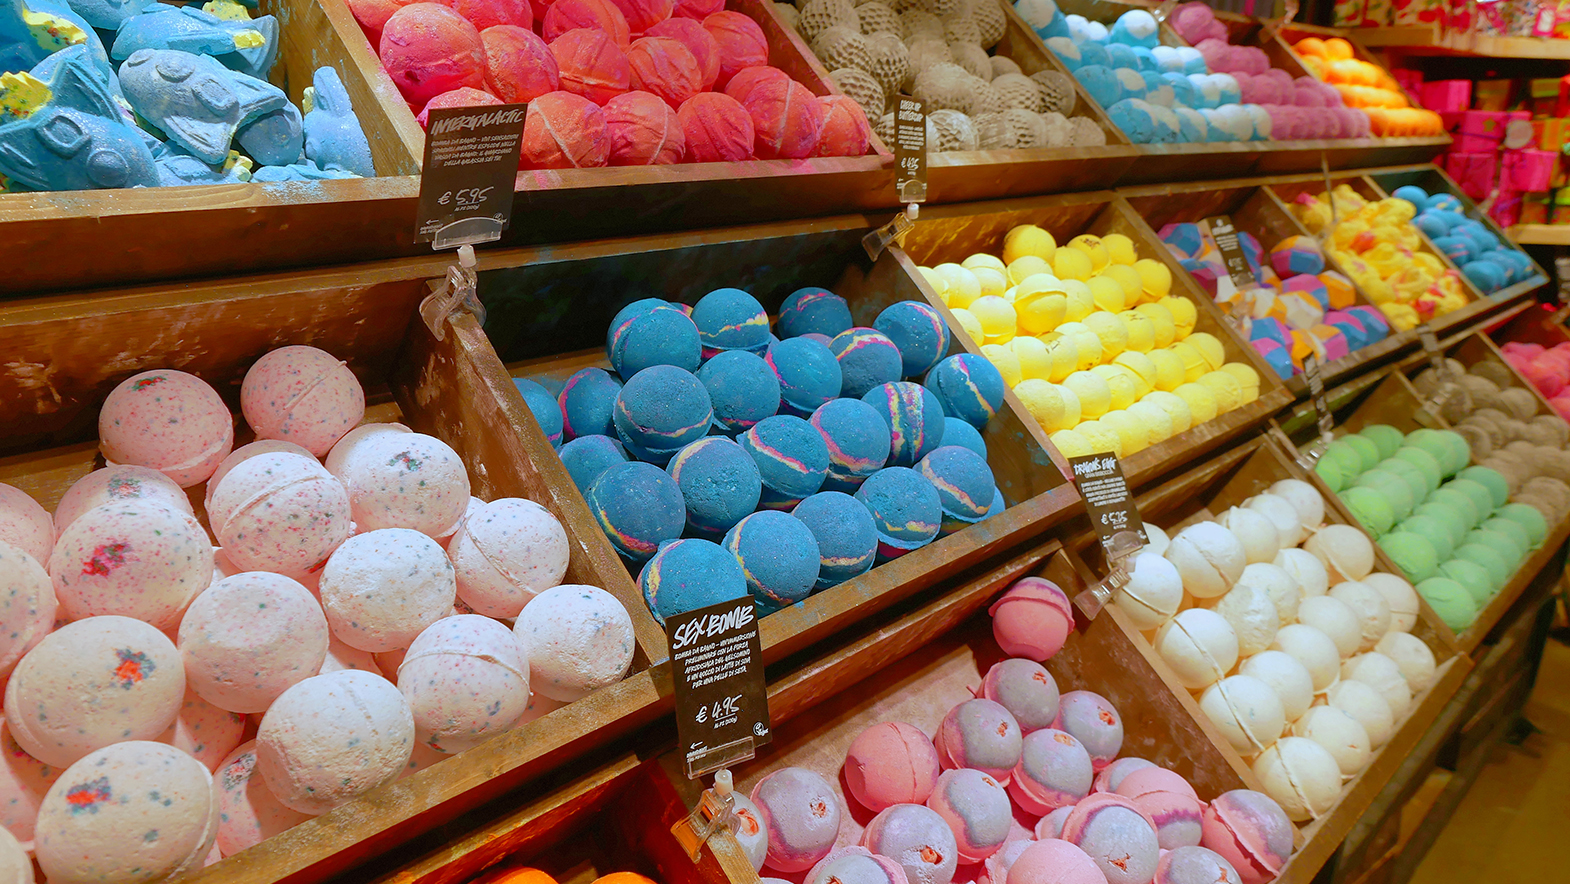 Lush Bath Bombs: Amazon Reviews | Top Ranked and Reviewed 2019